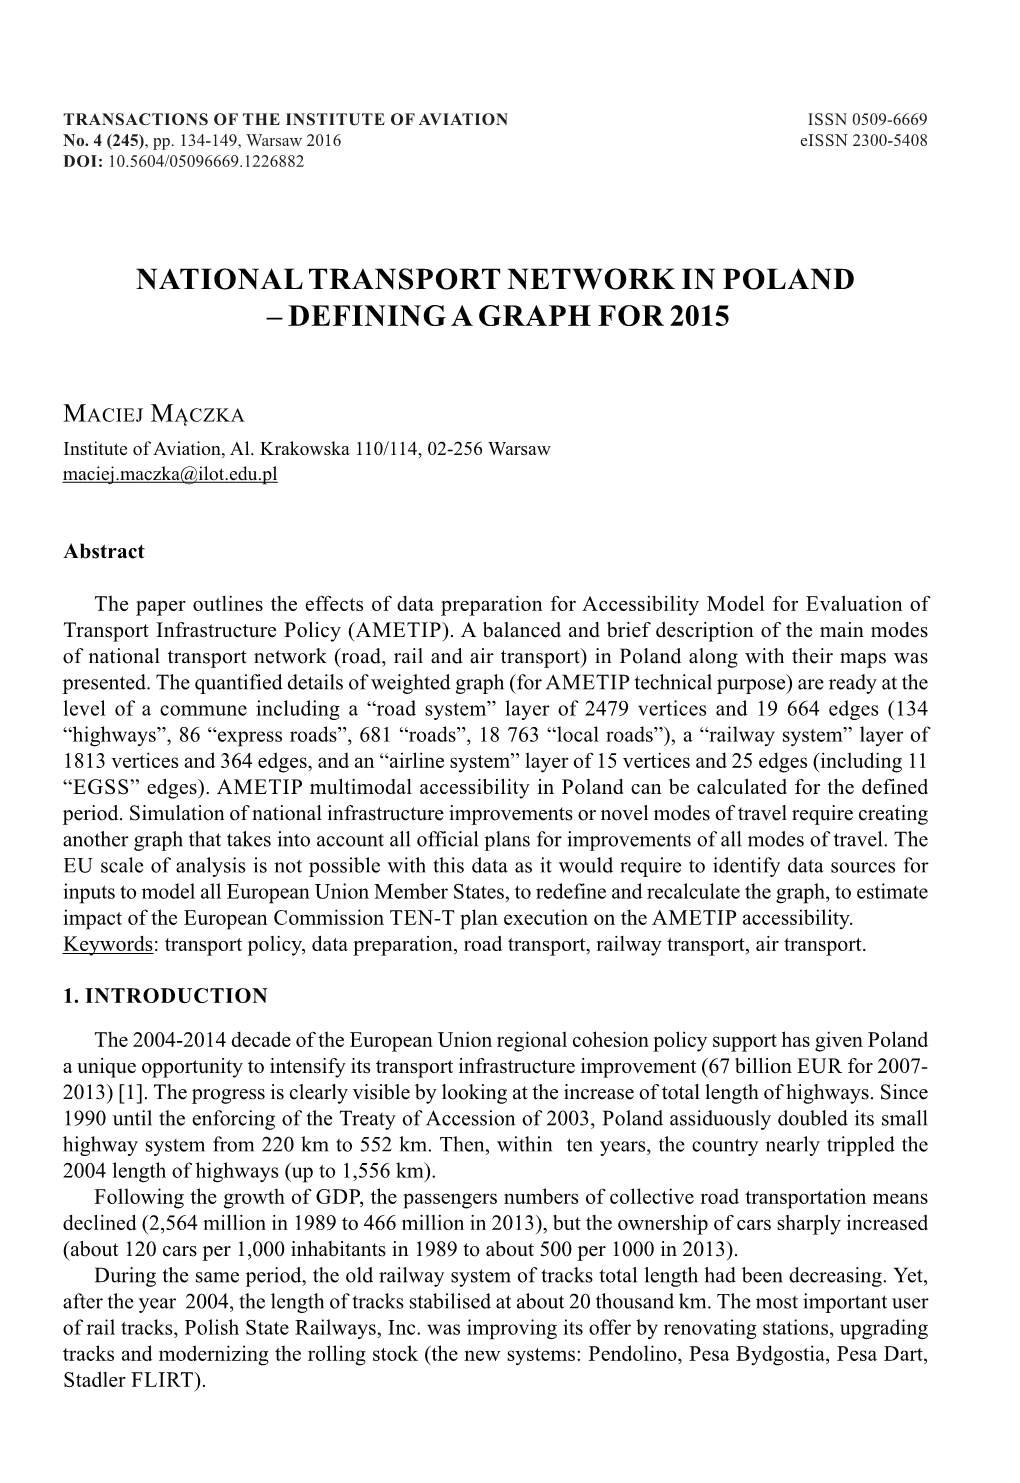 National Transport Network in Poland – Defining a Graph for 2015